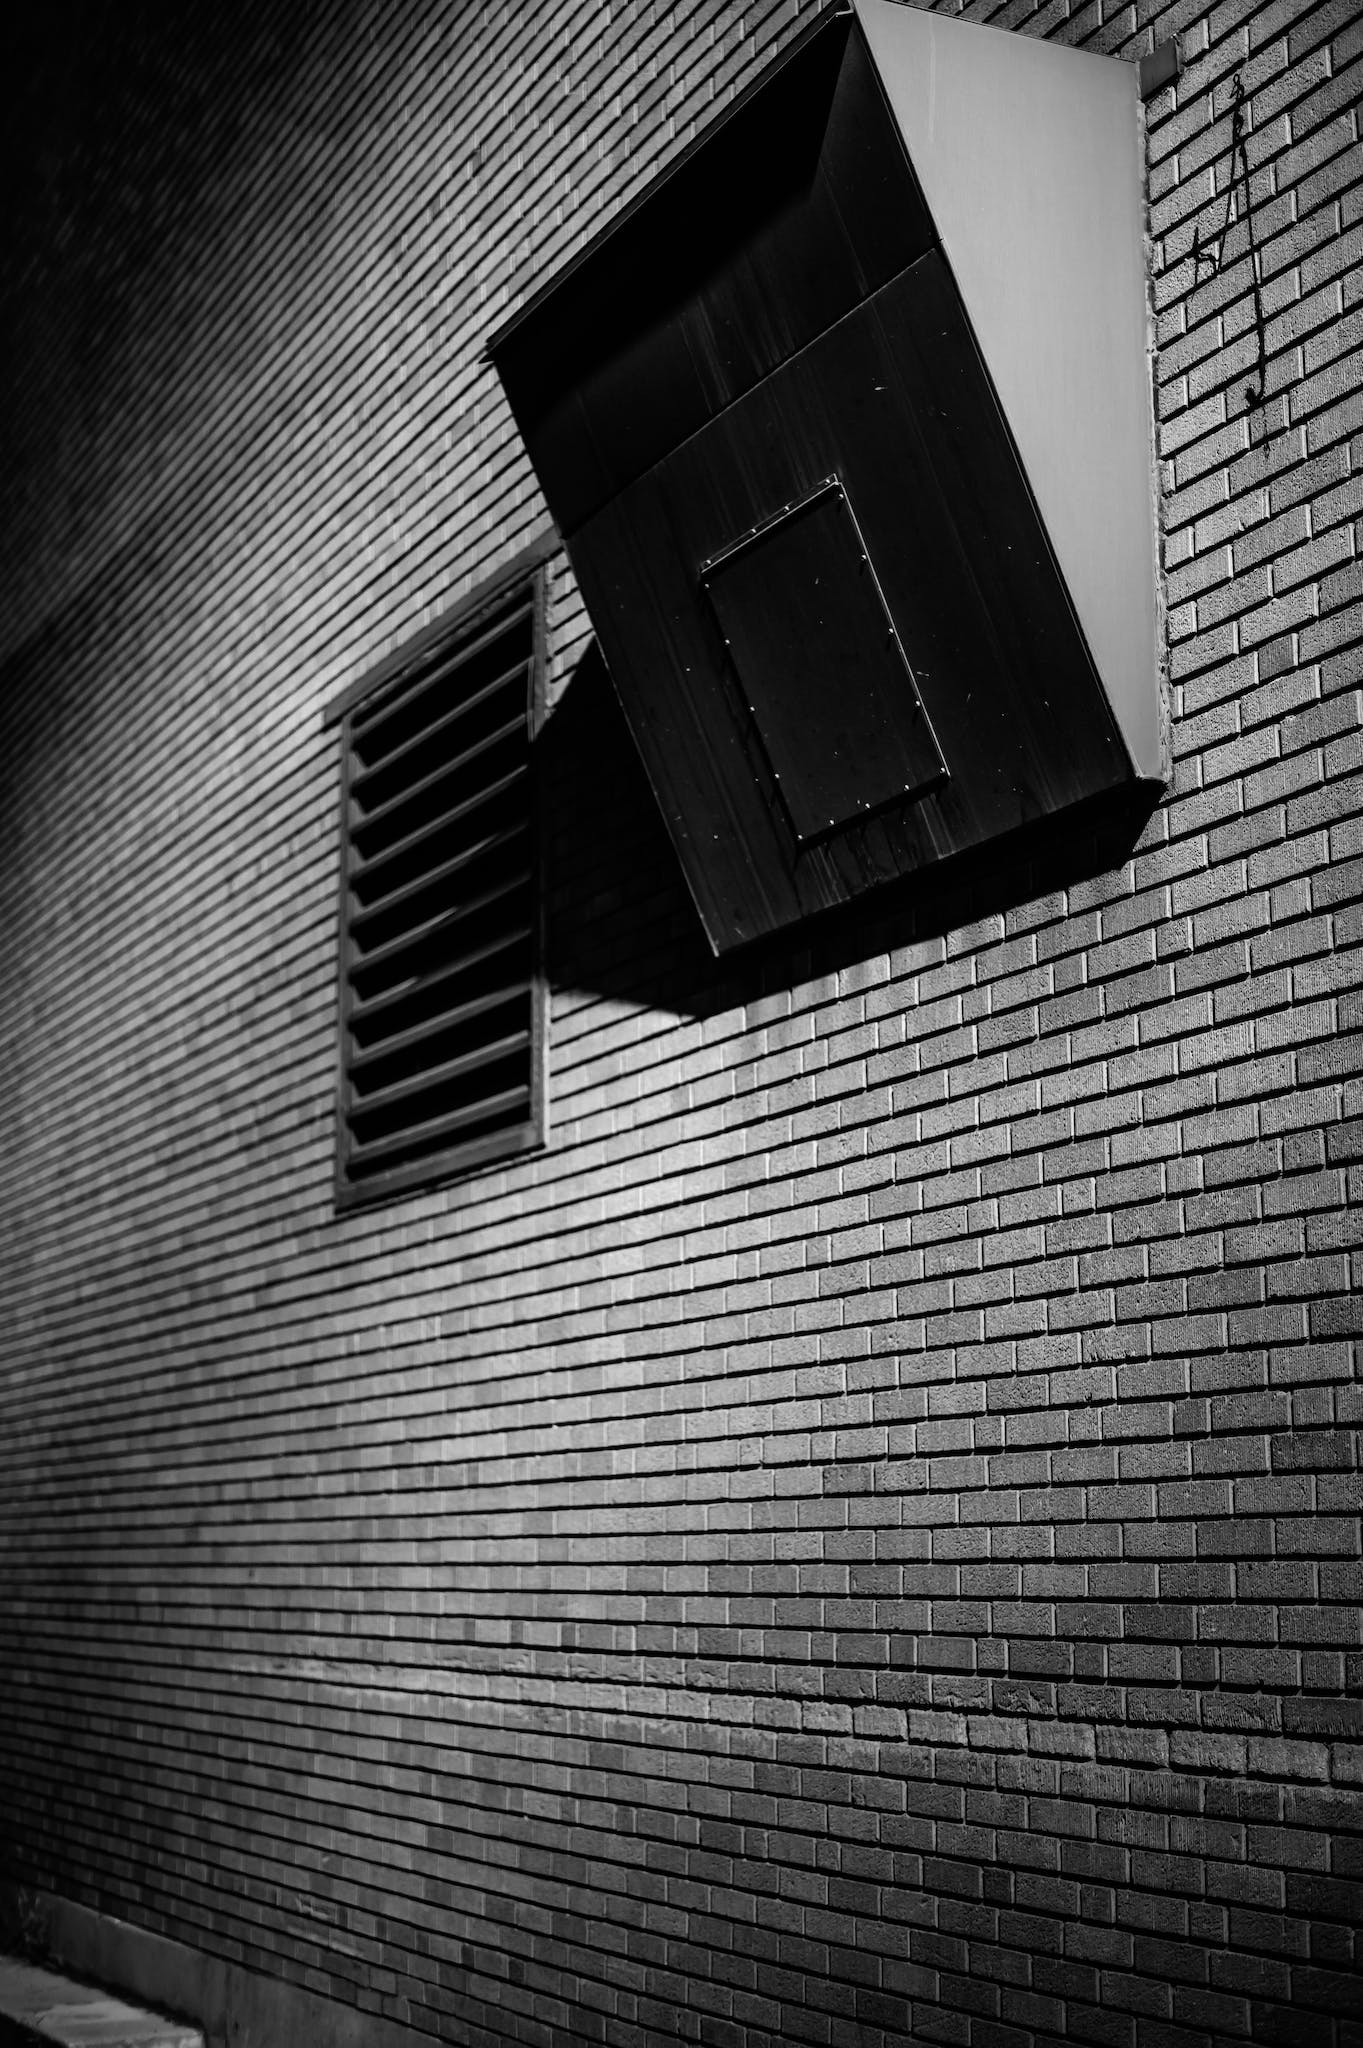 Brick wall of building with system of ventilation